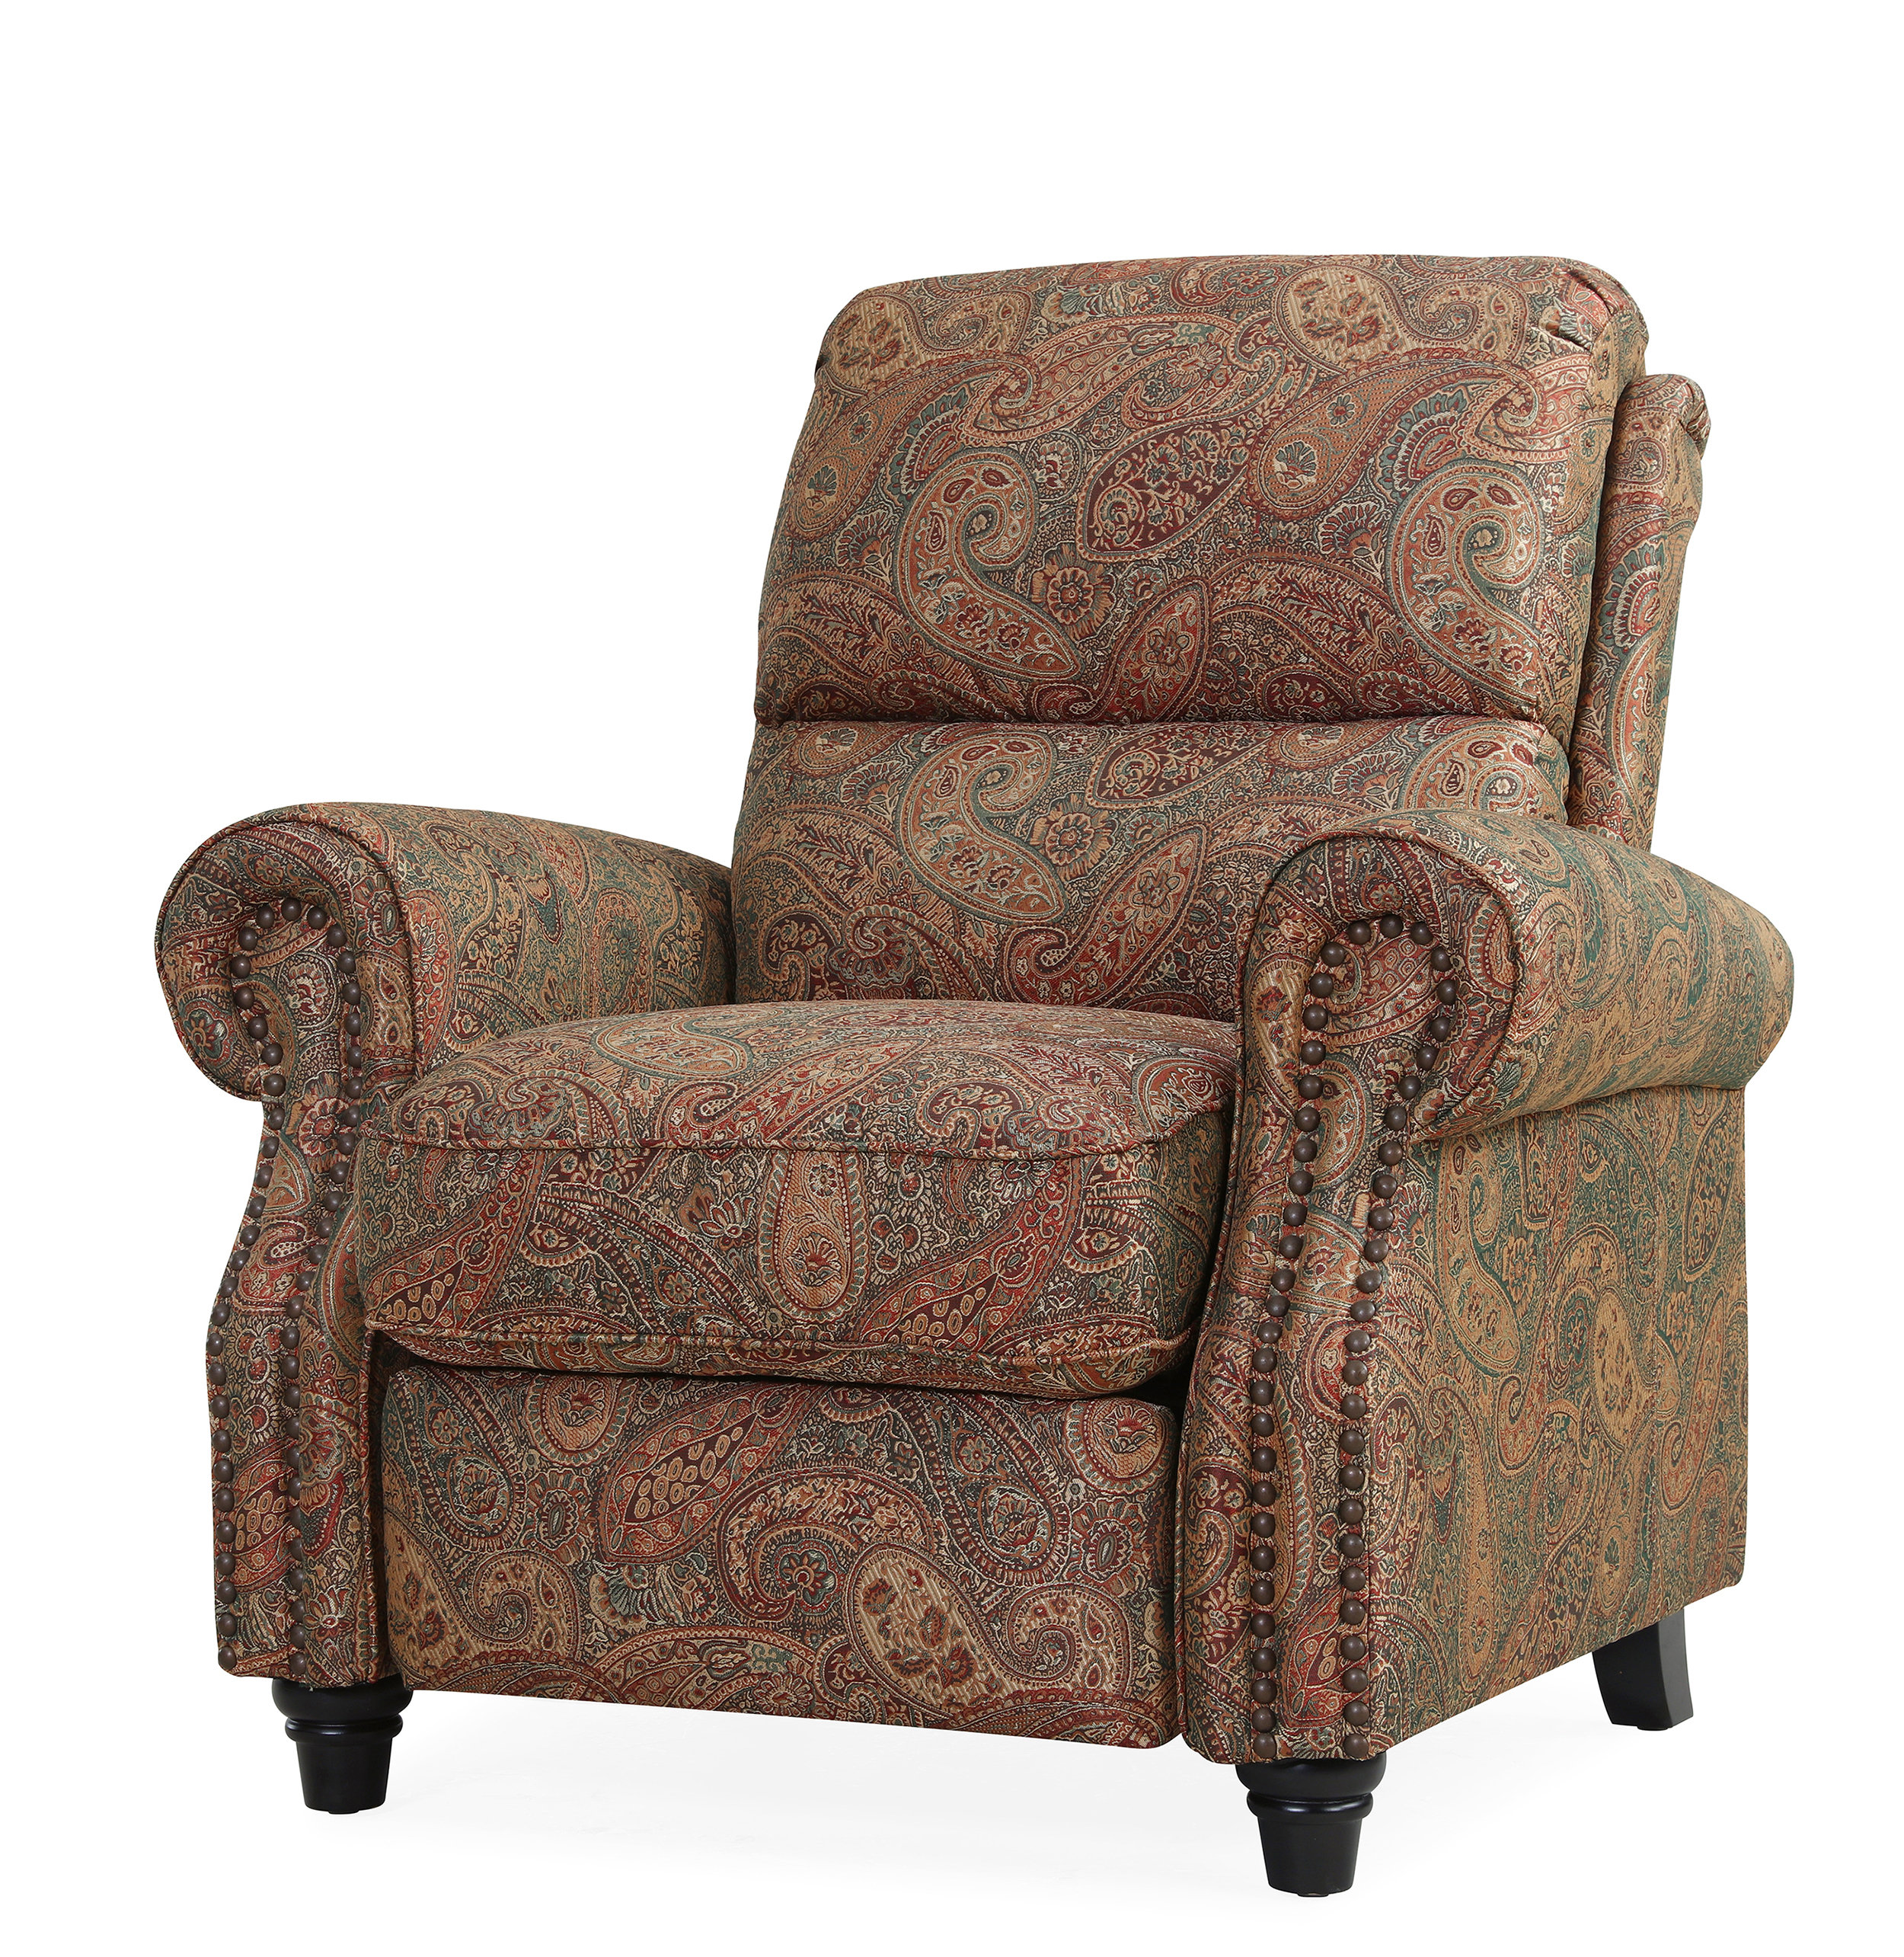 Chairs & Recliners Sale You'll Love | Wayfair